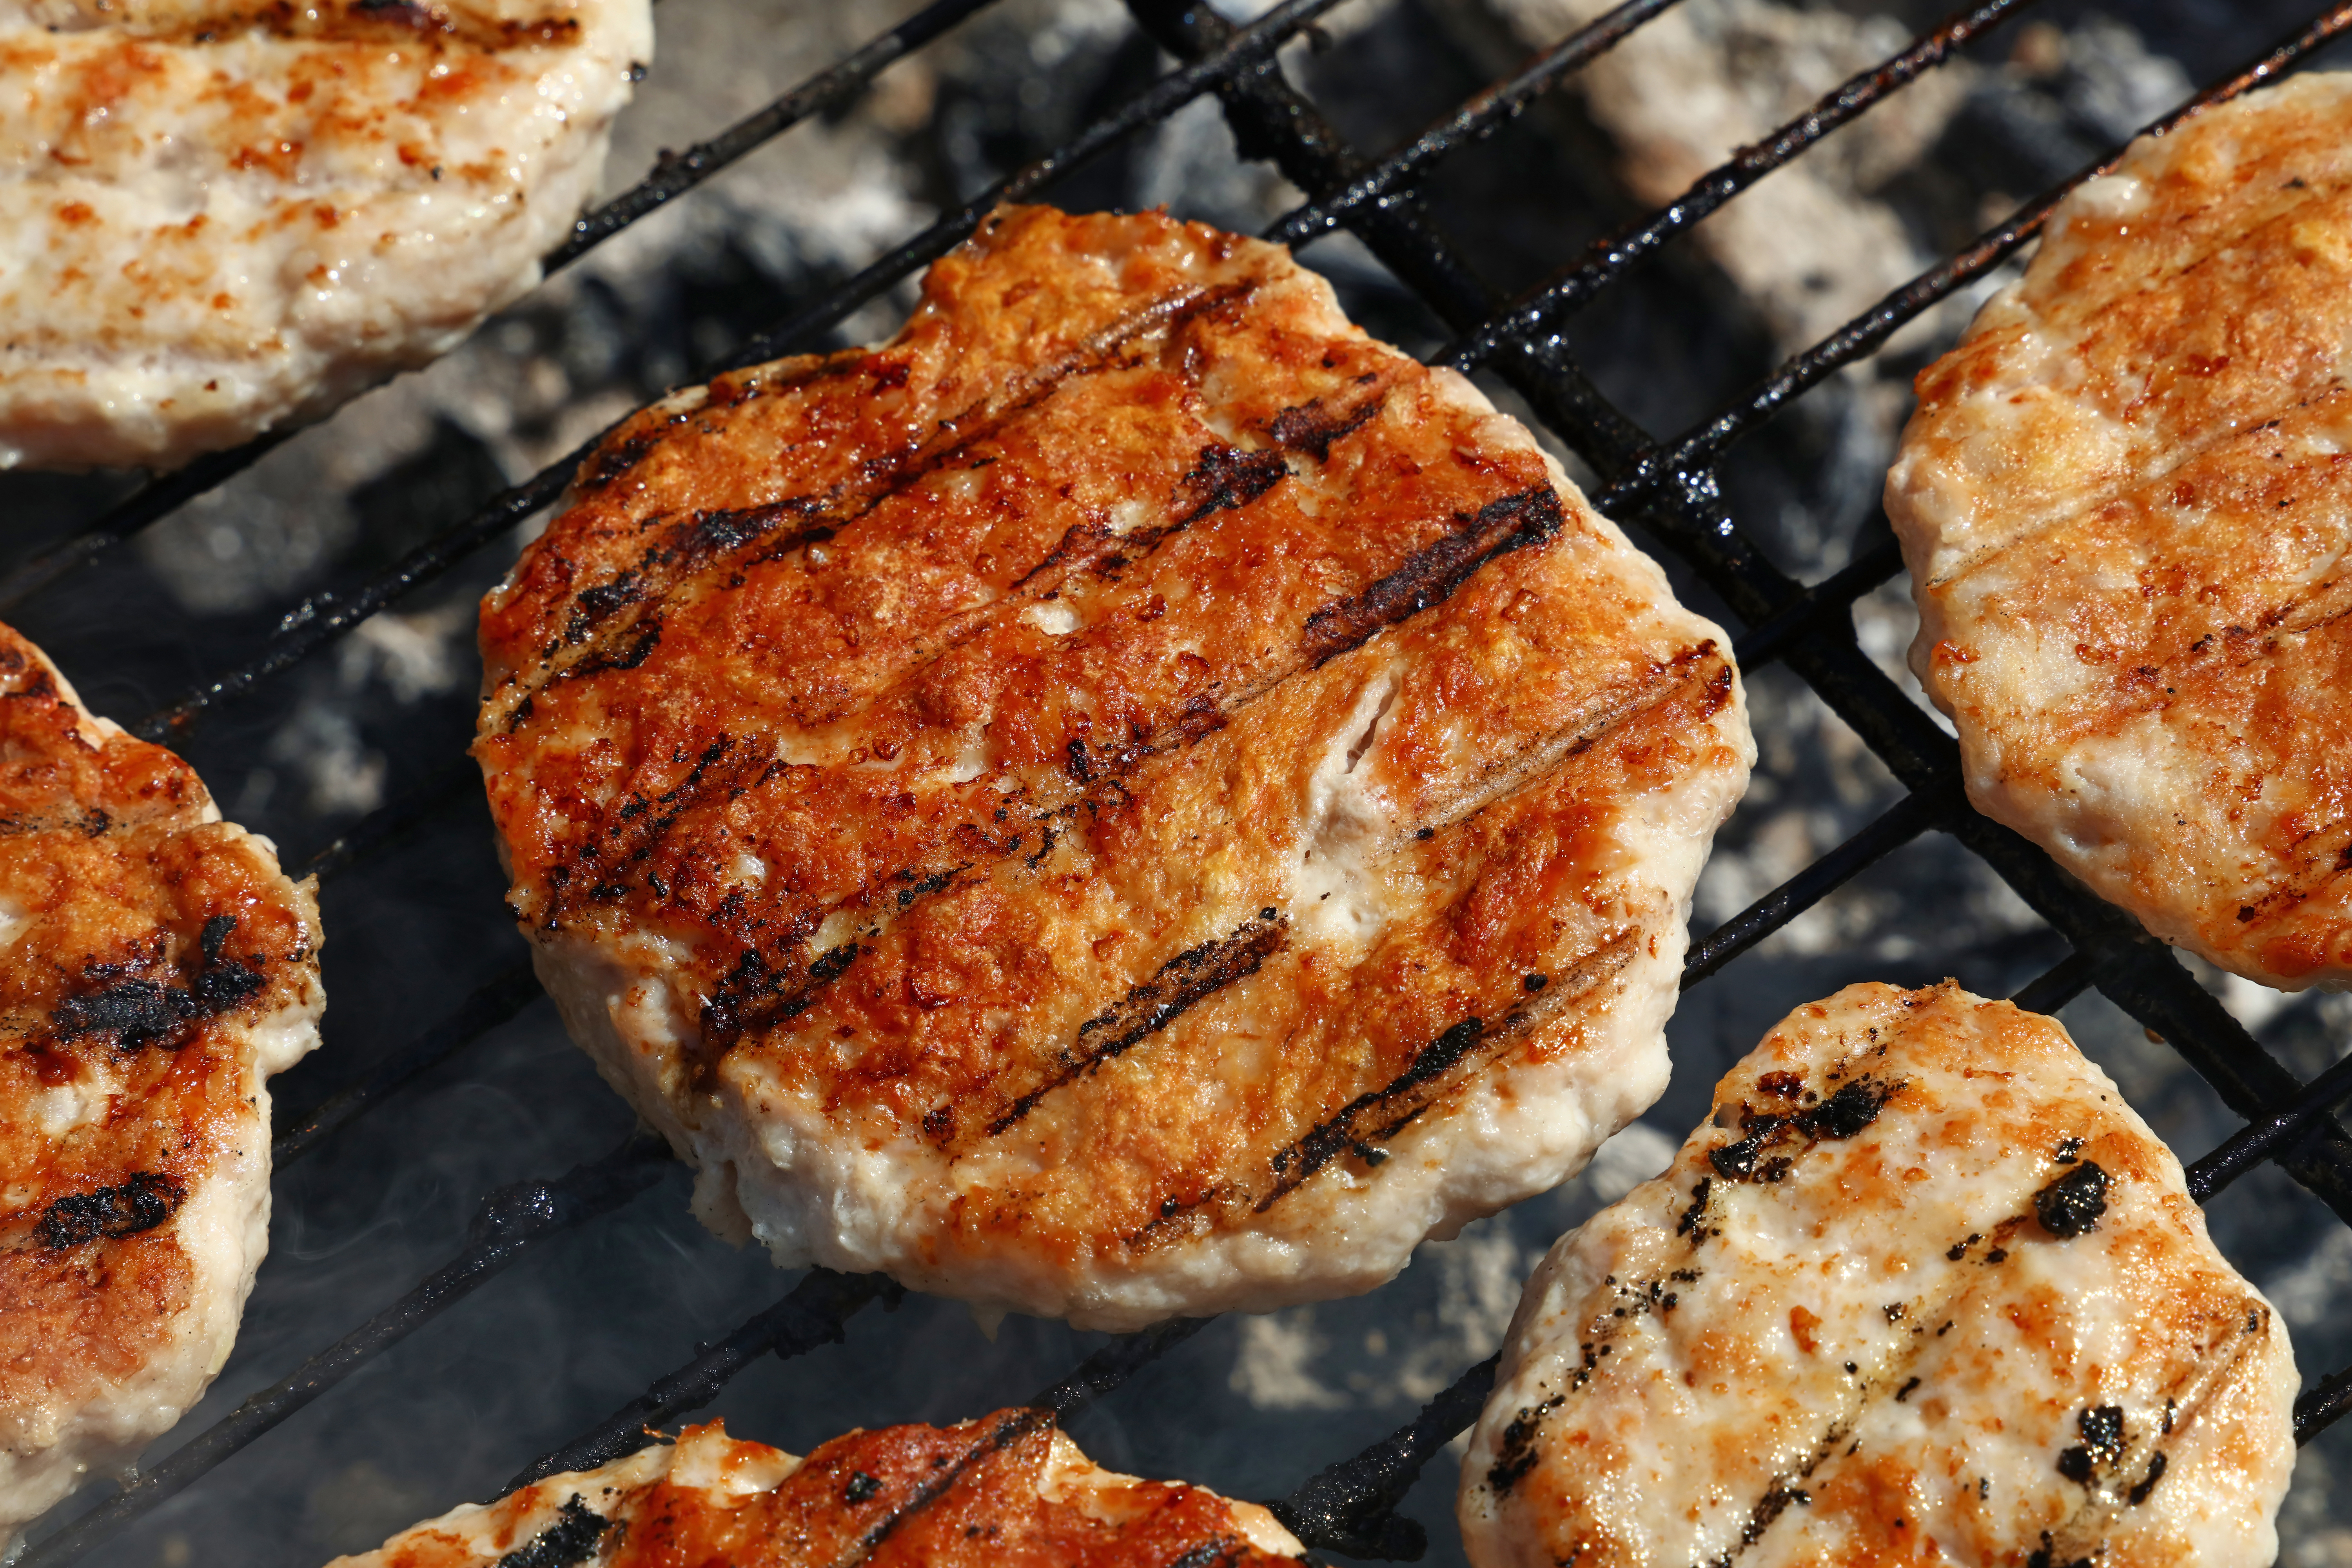 Grill each turkey patty for 6 minutes on each side. | Source: Shutterstock